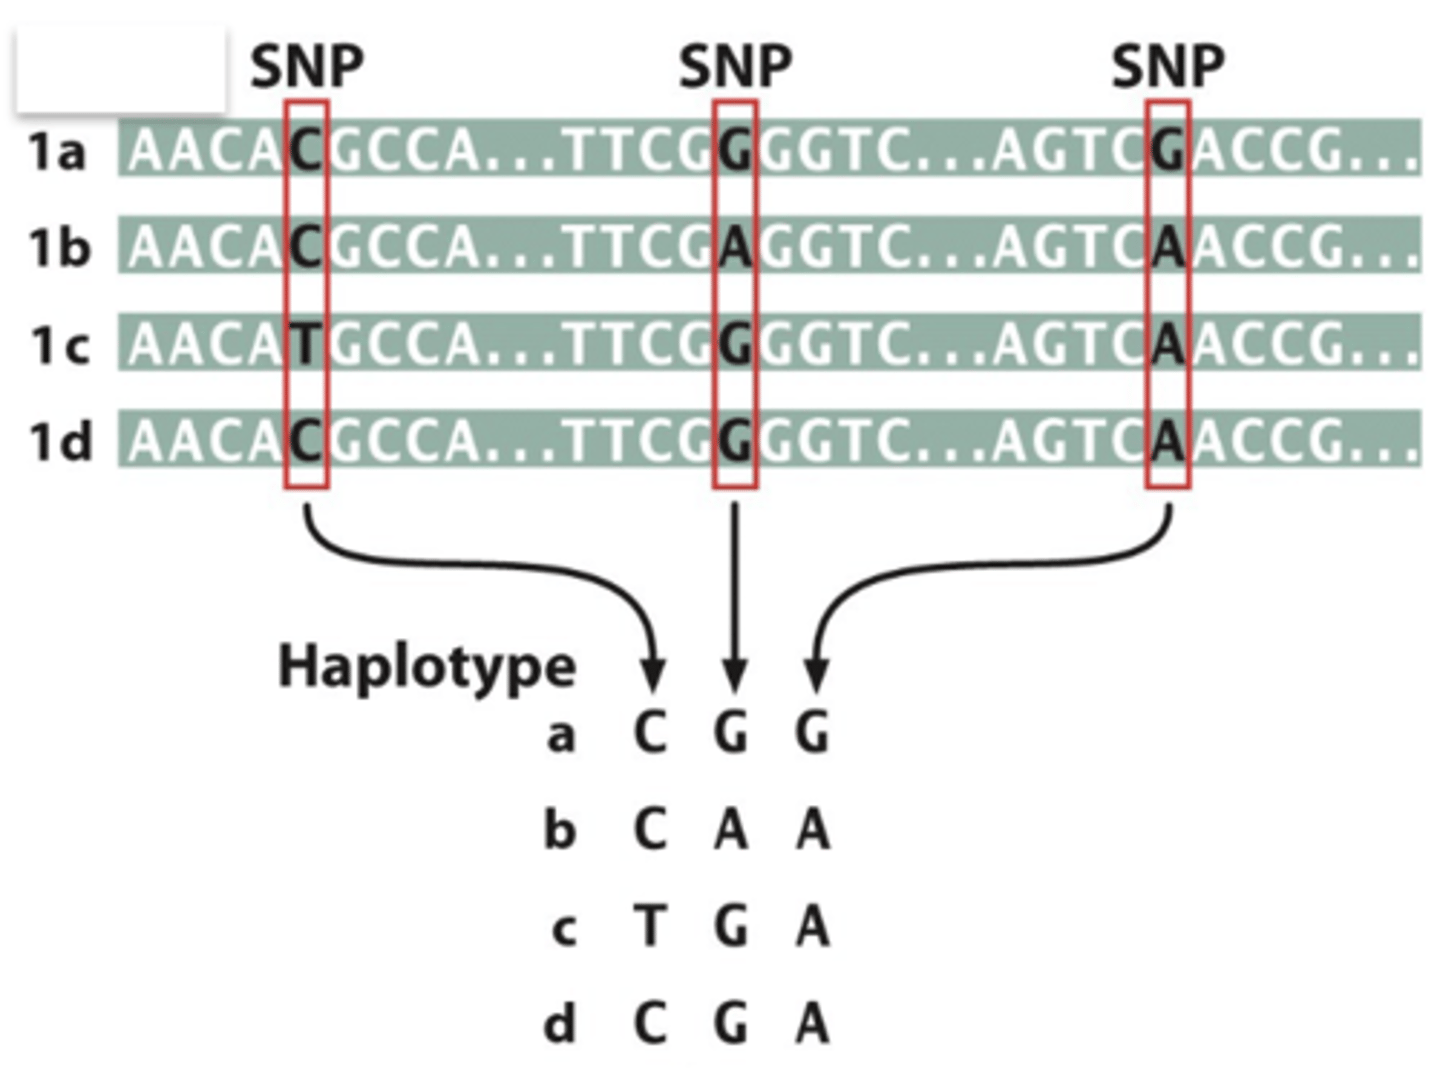 <p>_____________= a specific set of SNP variants that are closely linked and very rarely separated by recombination</p>